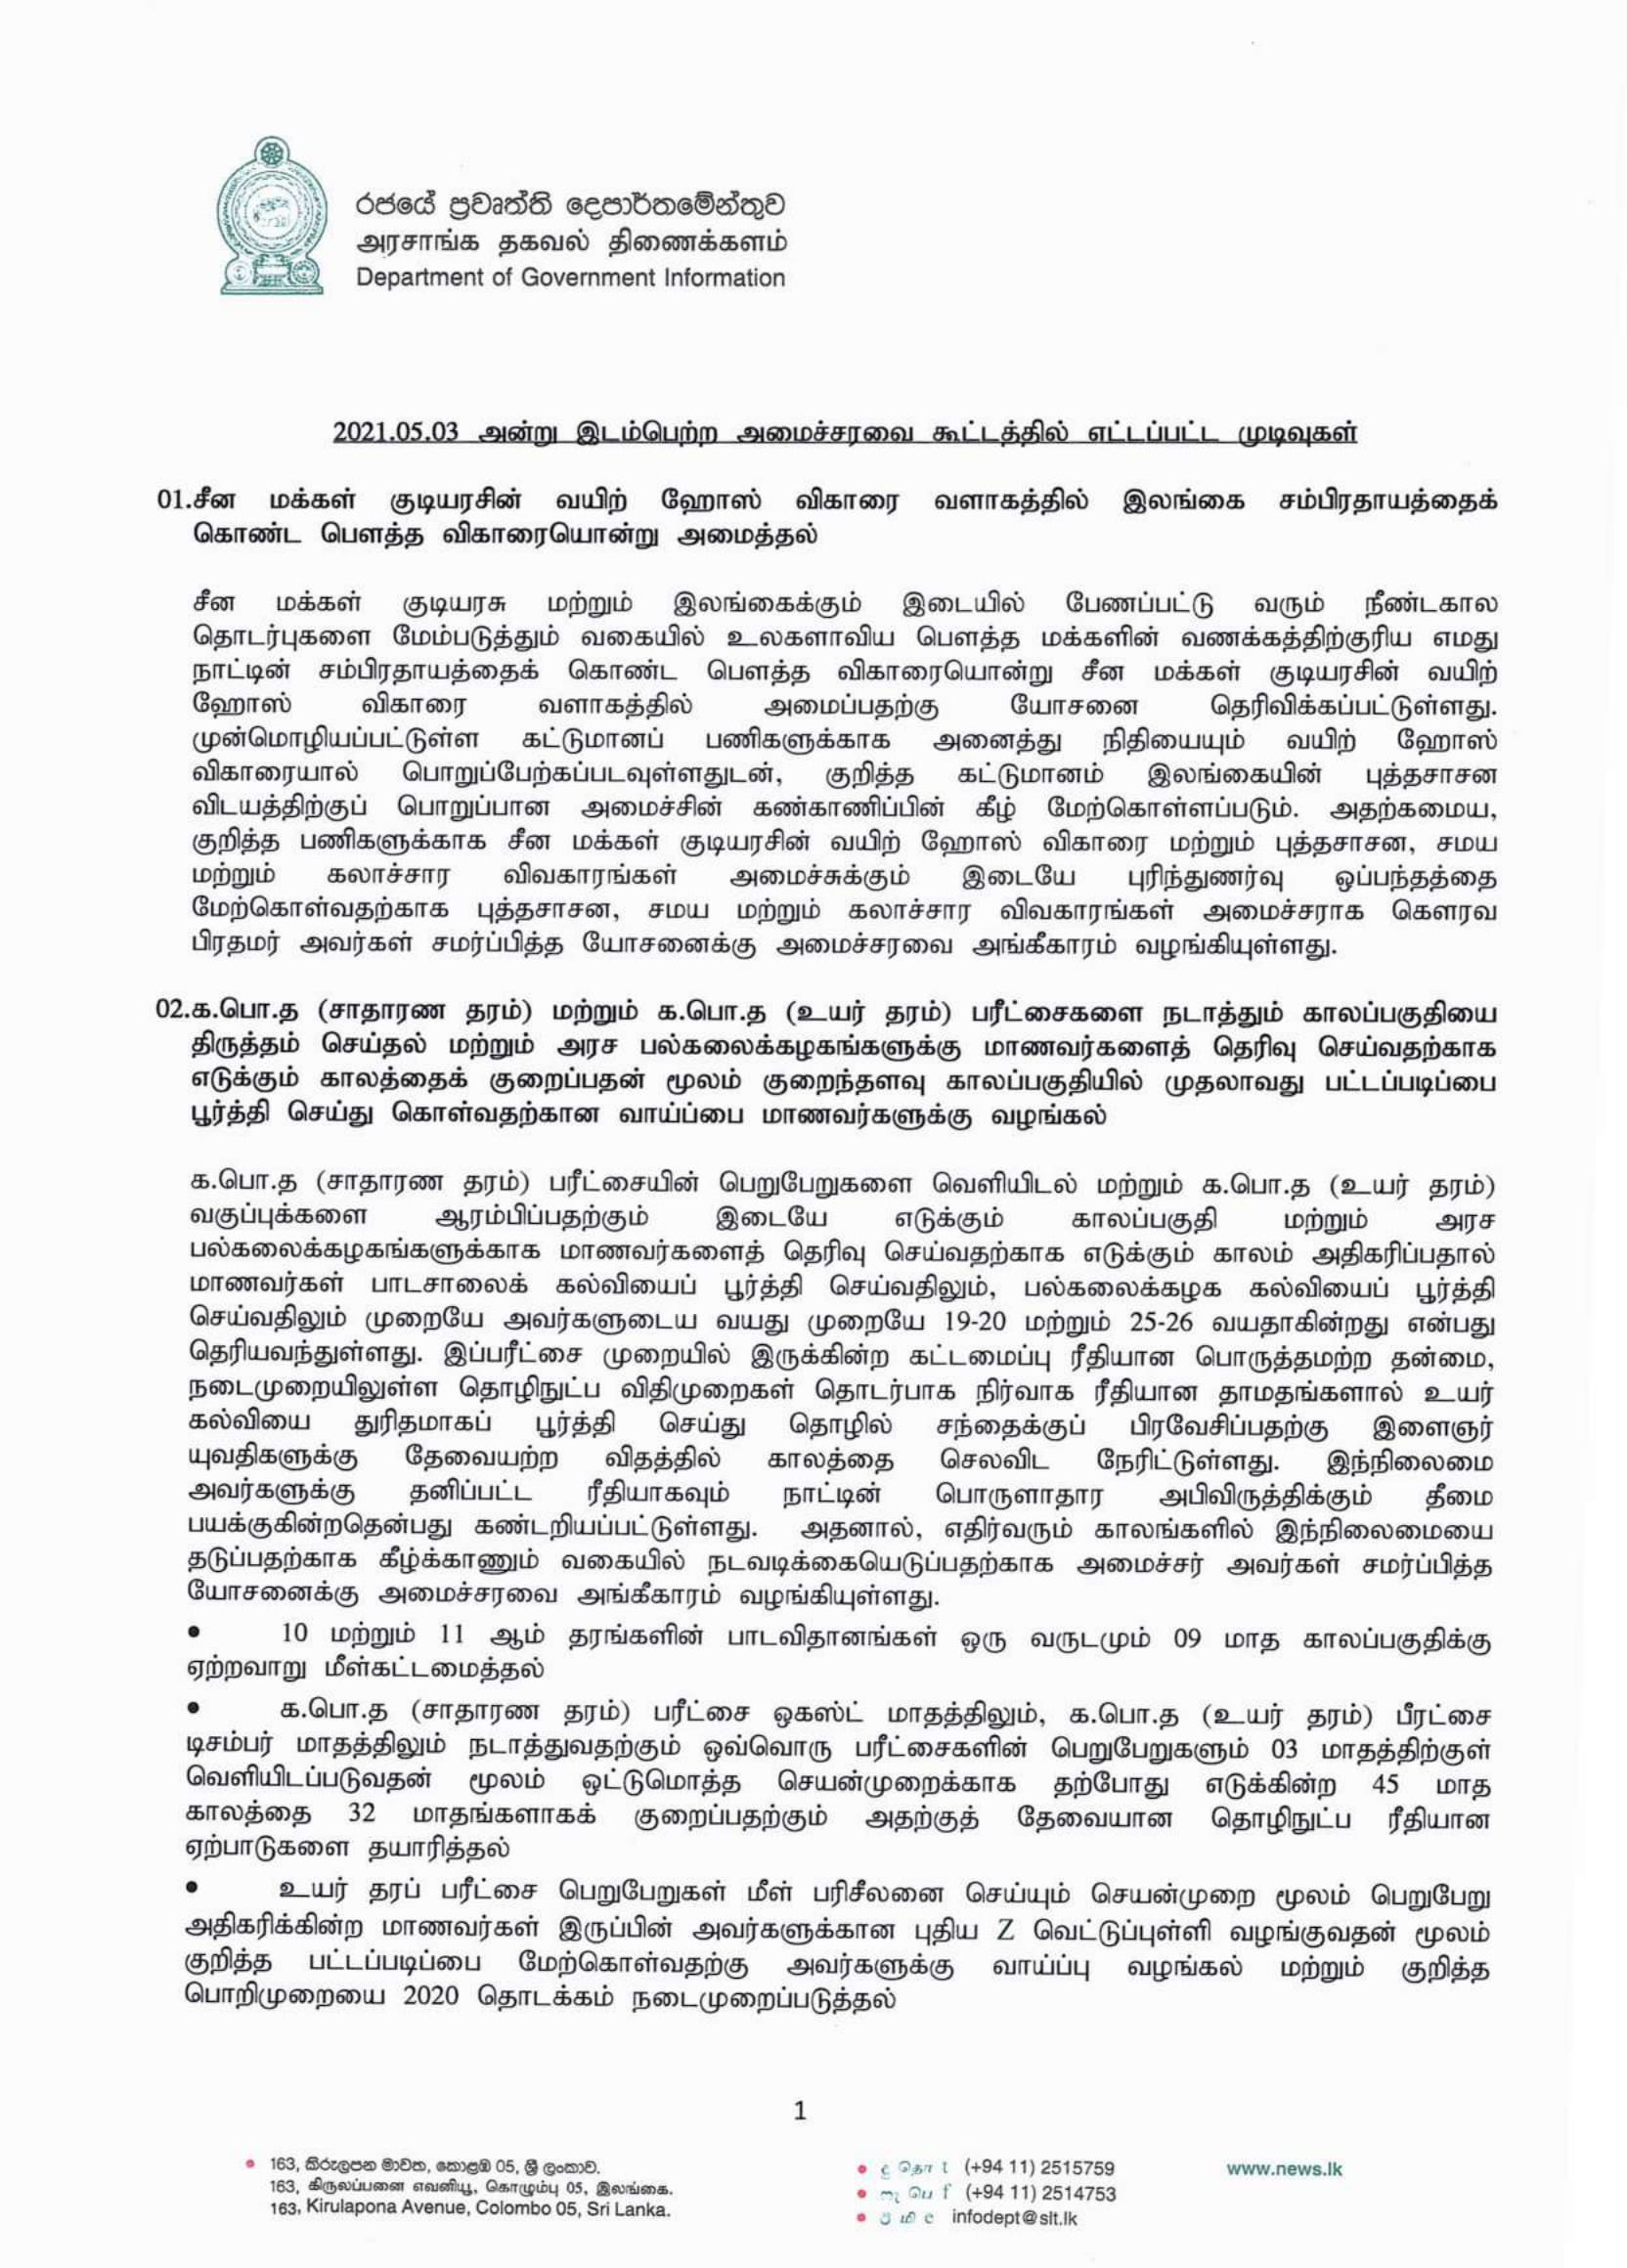 Cabinet Decision on 03.05.2021 Tamil 1